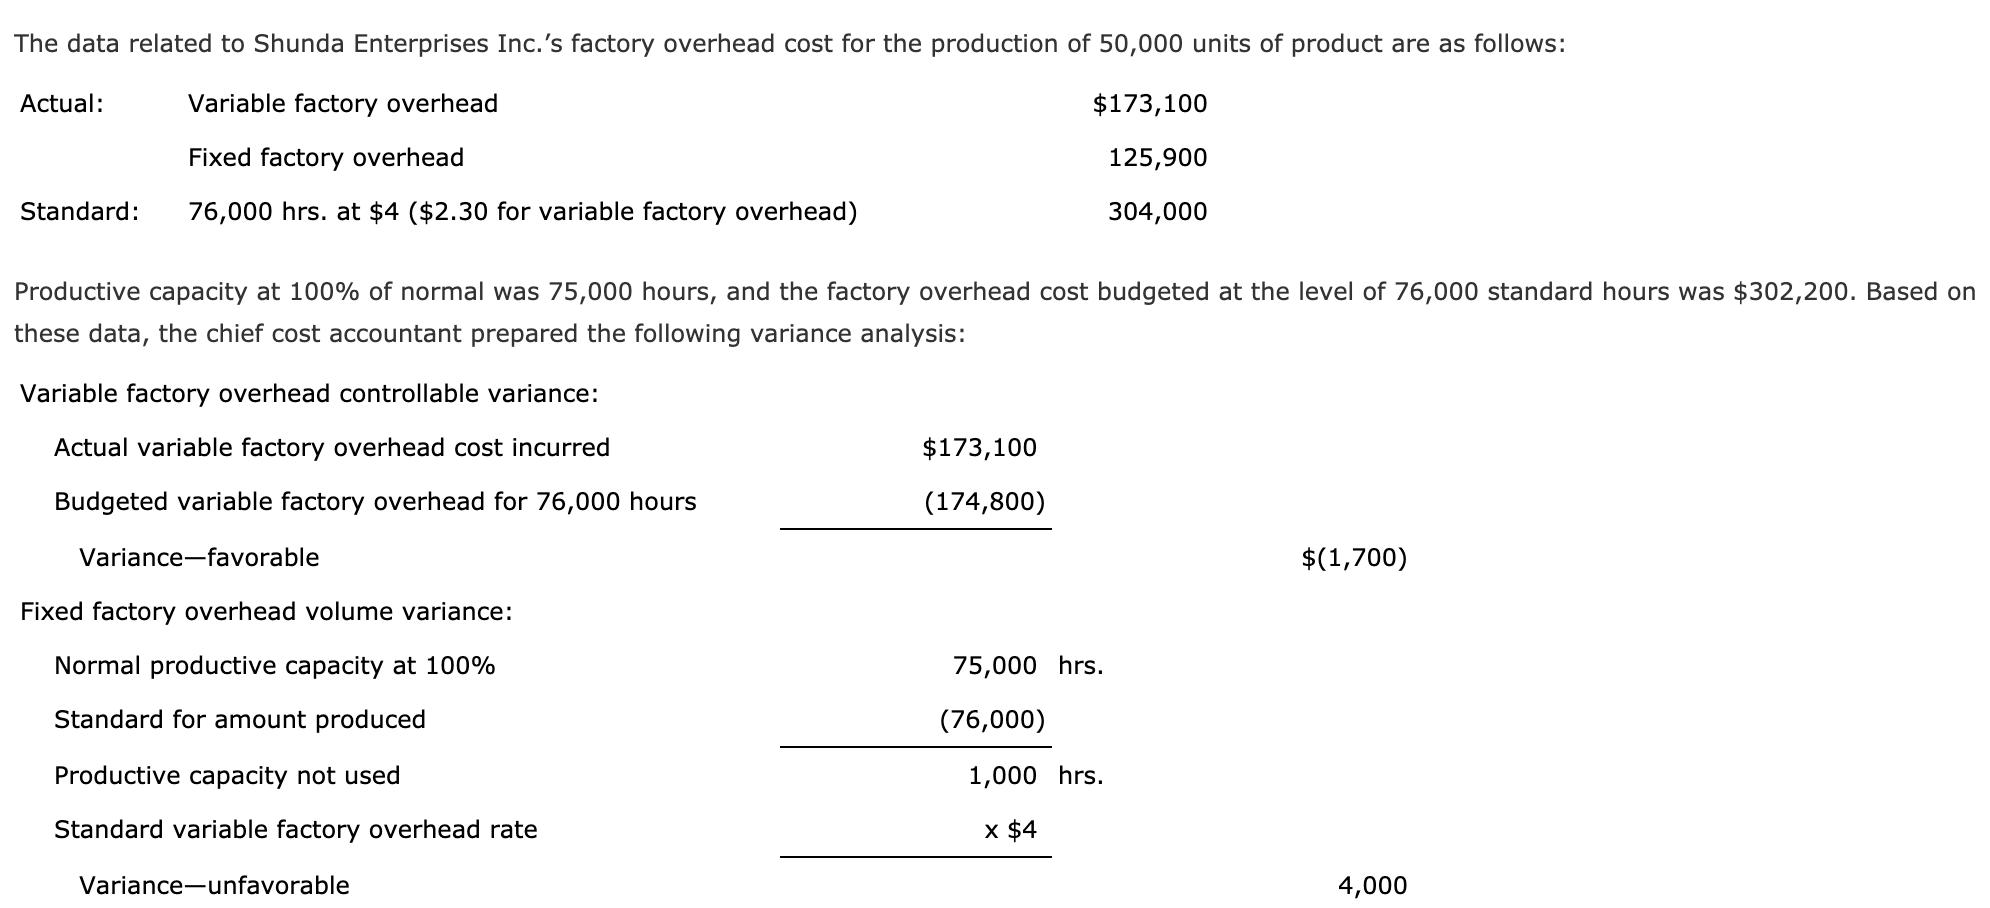 The data related to Shunda Enterprises Inc.s factory overhead cost for the production of 50,000 units of product are as foll